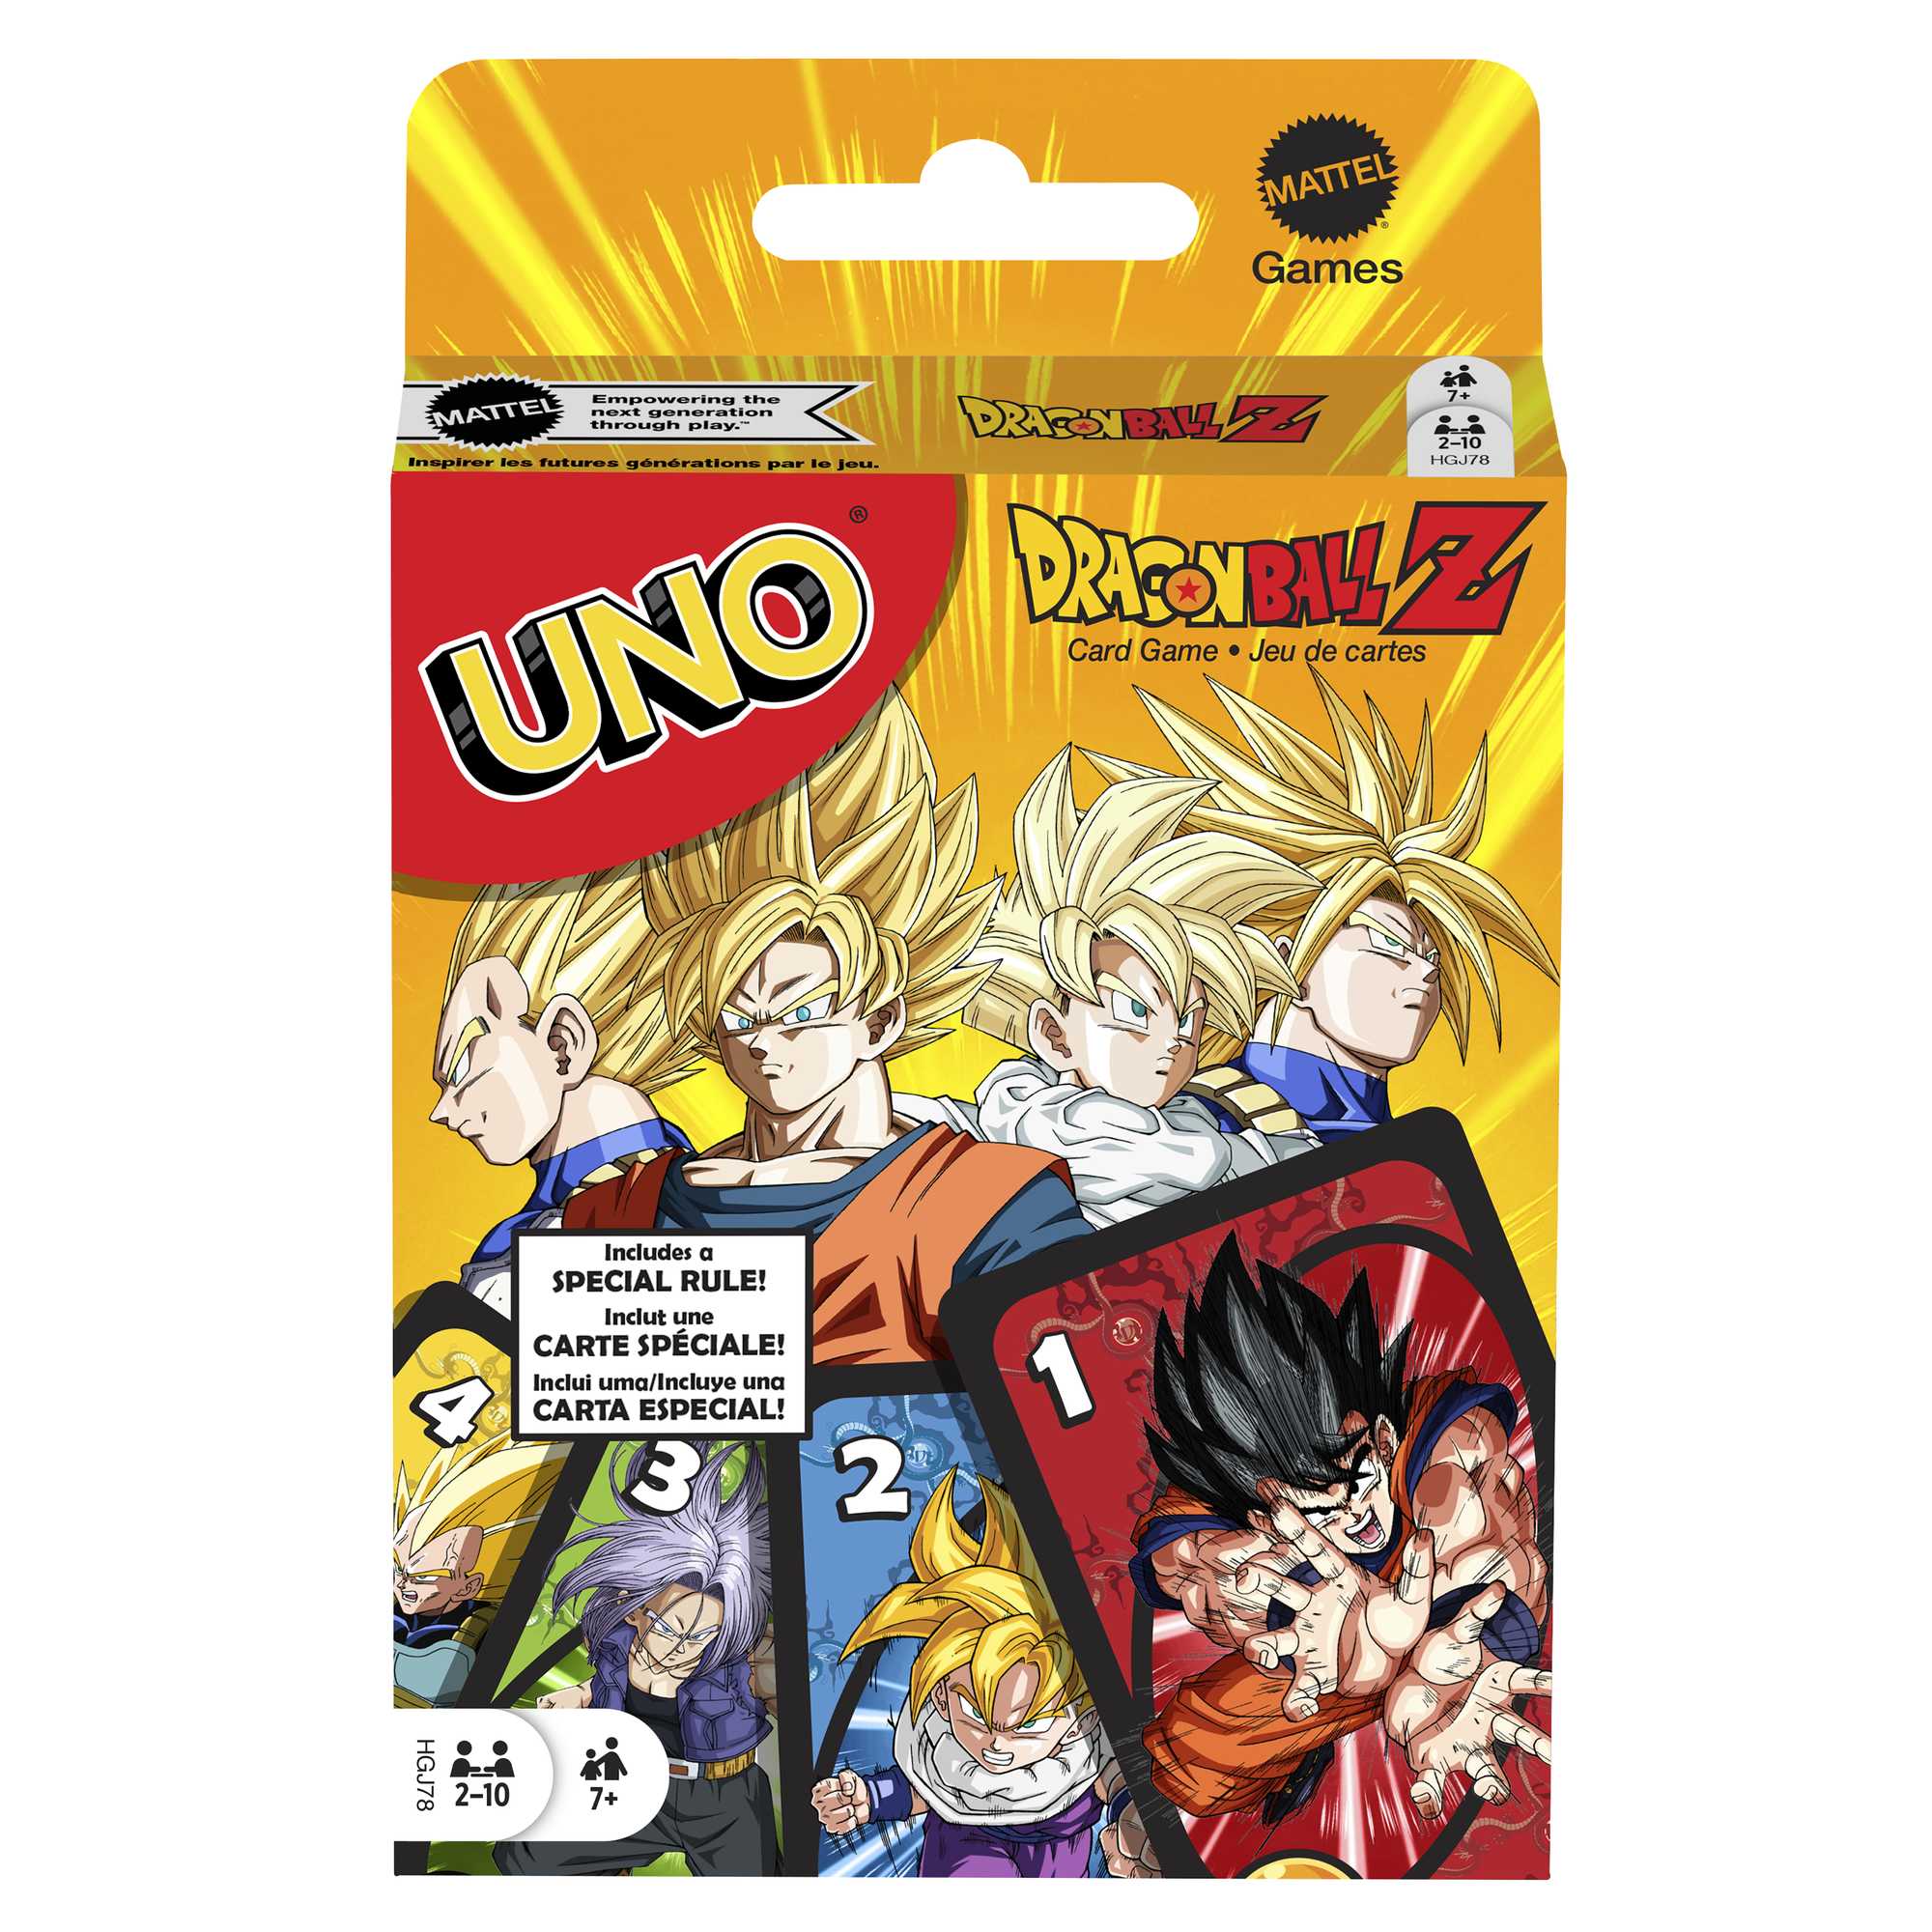 UNO Disney Wish Card Game for Kids, Adults & Family Night with Deck  Inspired by the Movie